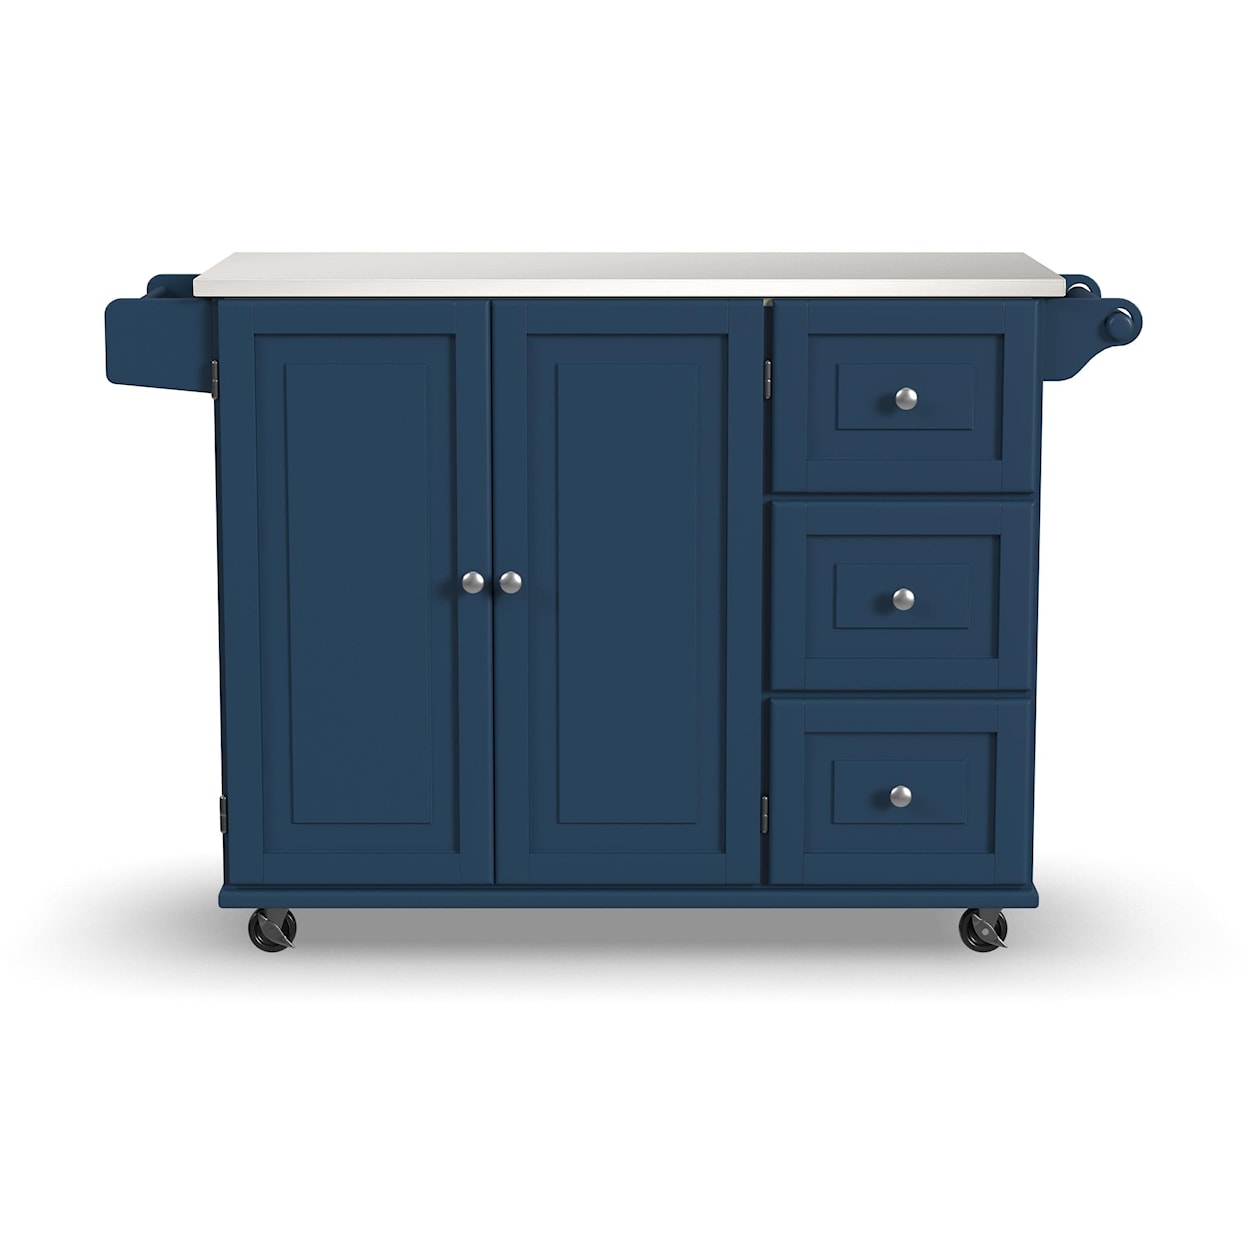 homestyles Dolly Madison Drop Leaf Kitchen Cart